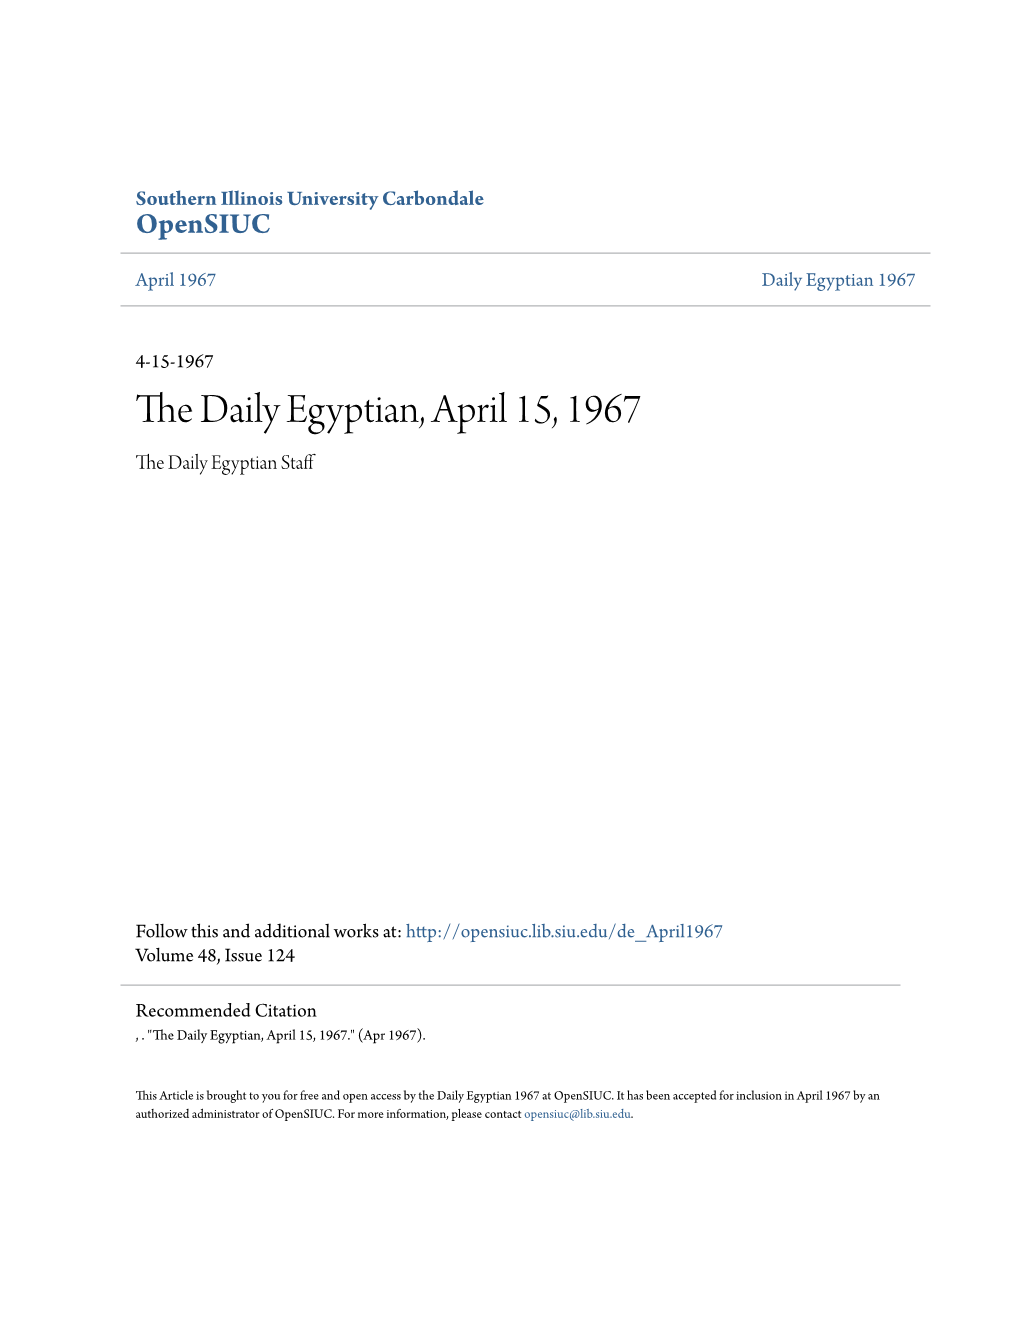 The Daily Egyptian, April 15, 1967